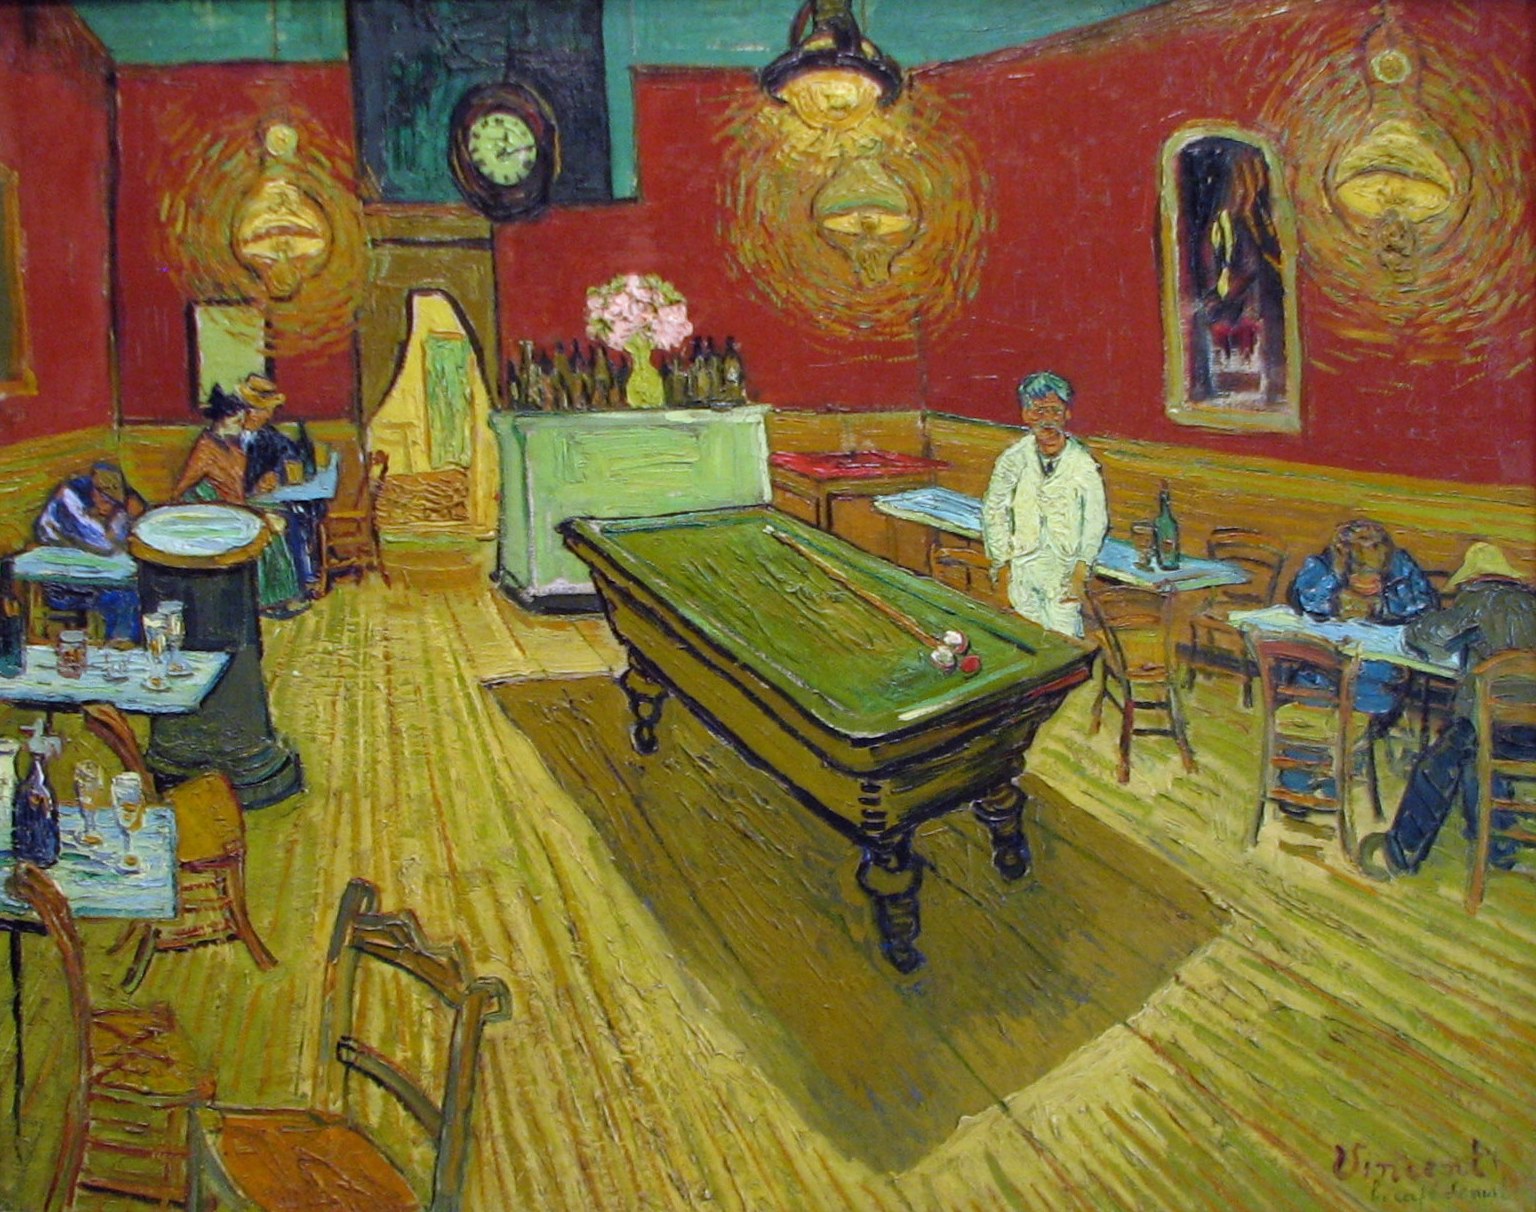 The Night Cafe by Vincent van Gogh